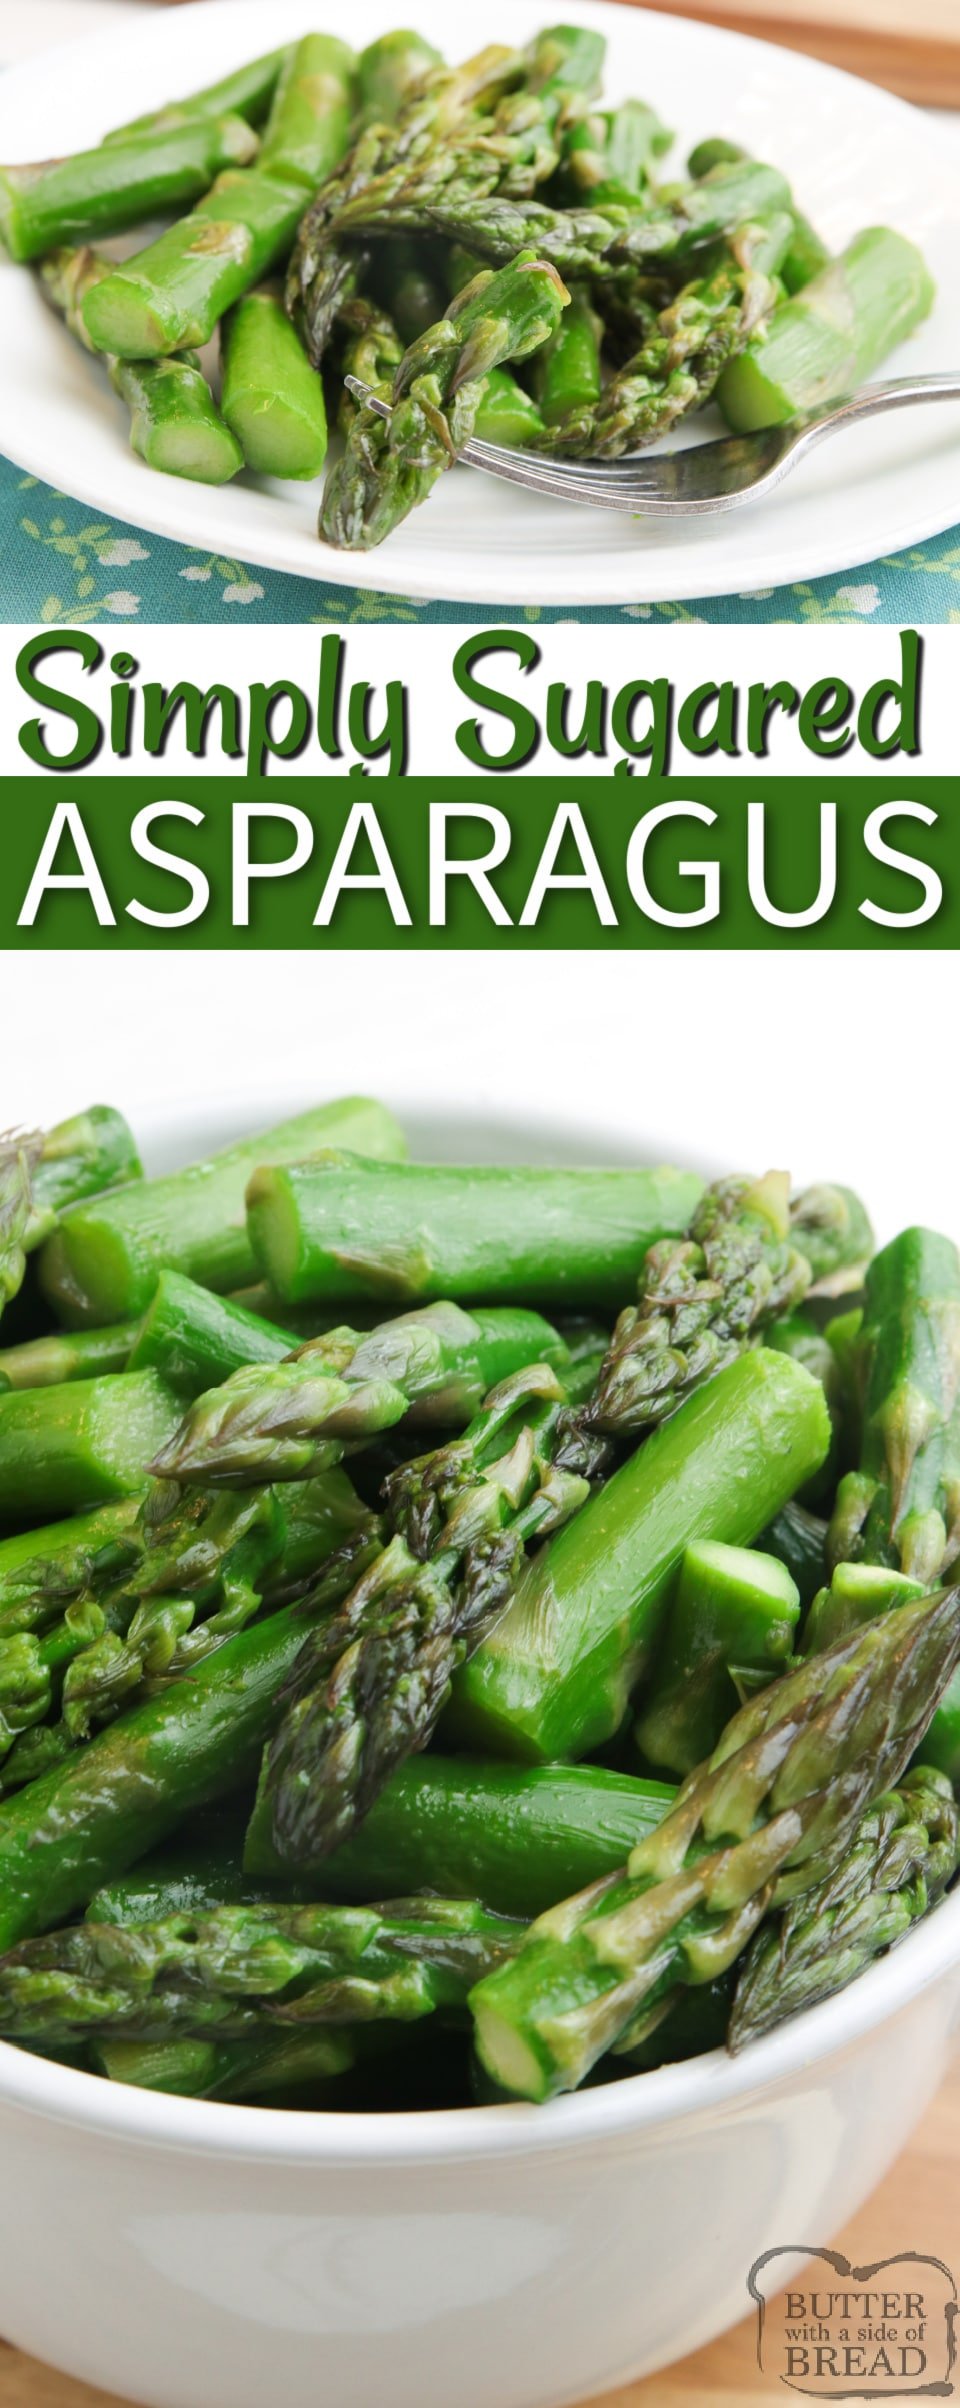 Sugared Asparagus recipe made with brown sugar, butter and chicken broth. Perfect balance of sweet and savory for a simple asparagus recipe that is made on the stove in just a few minutes.